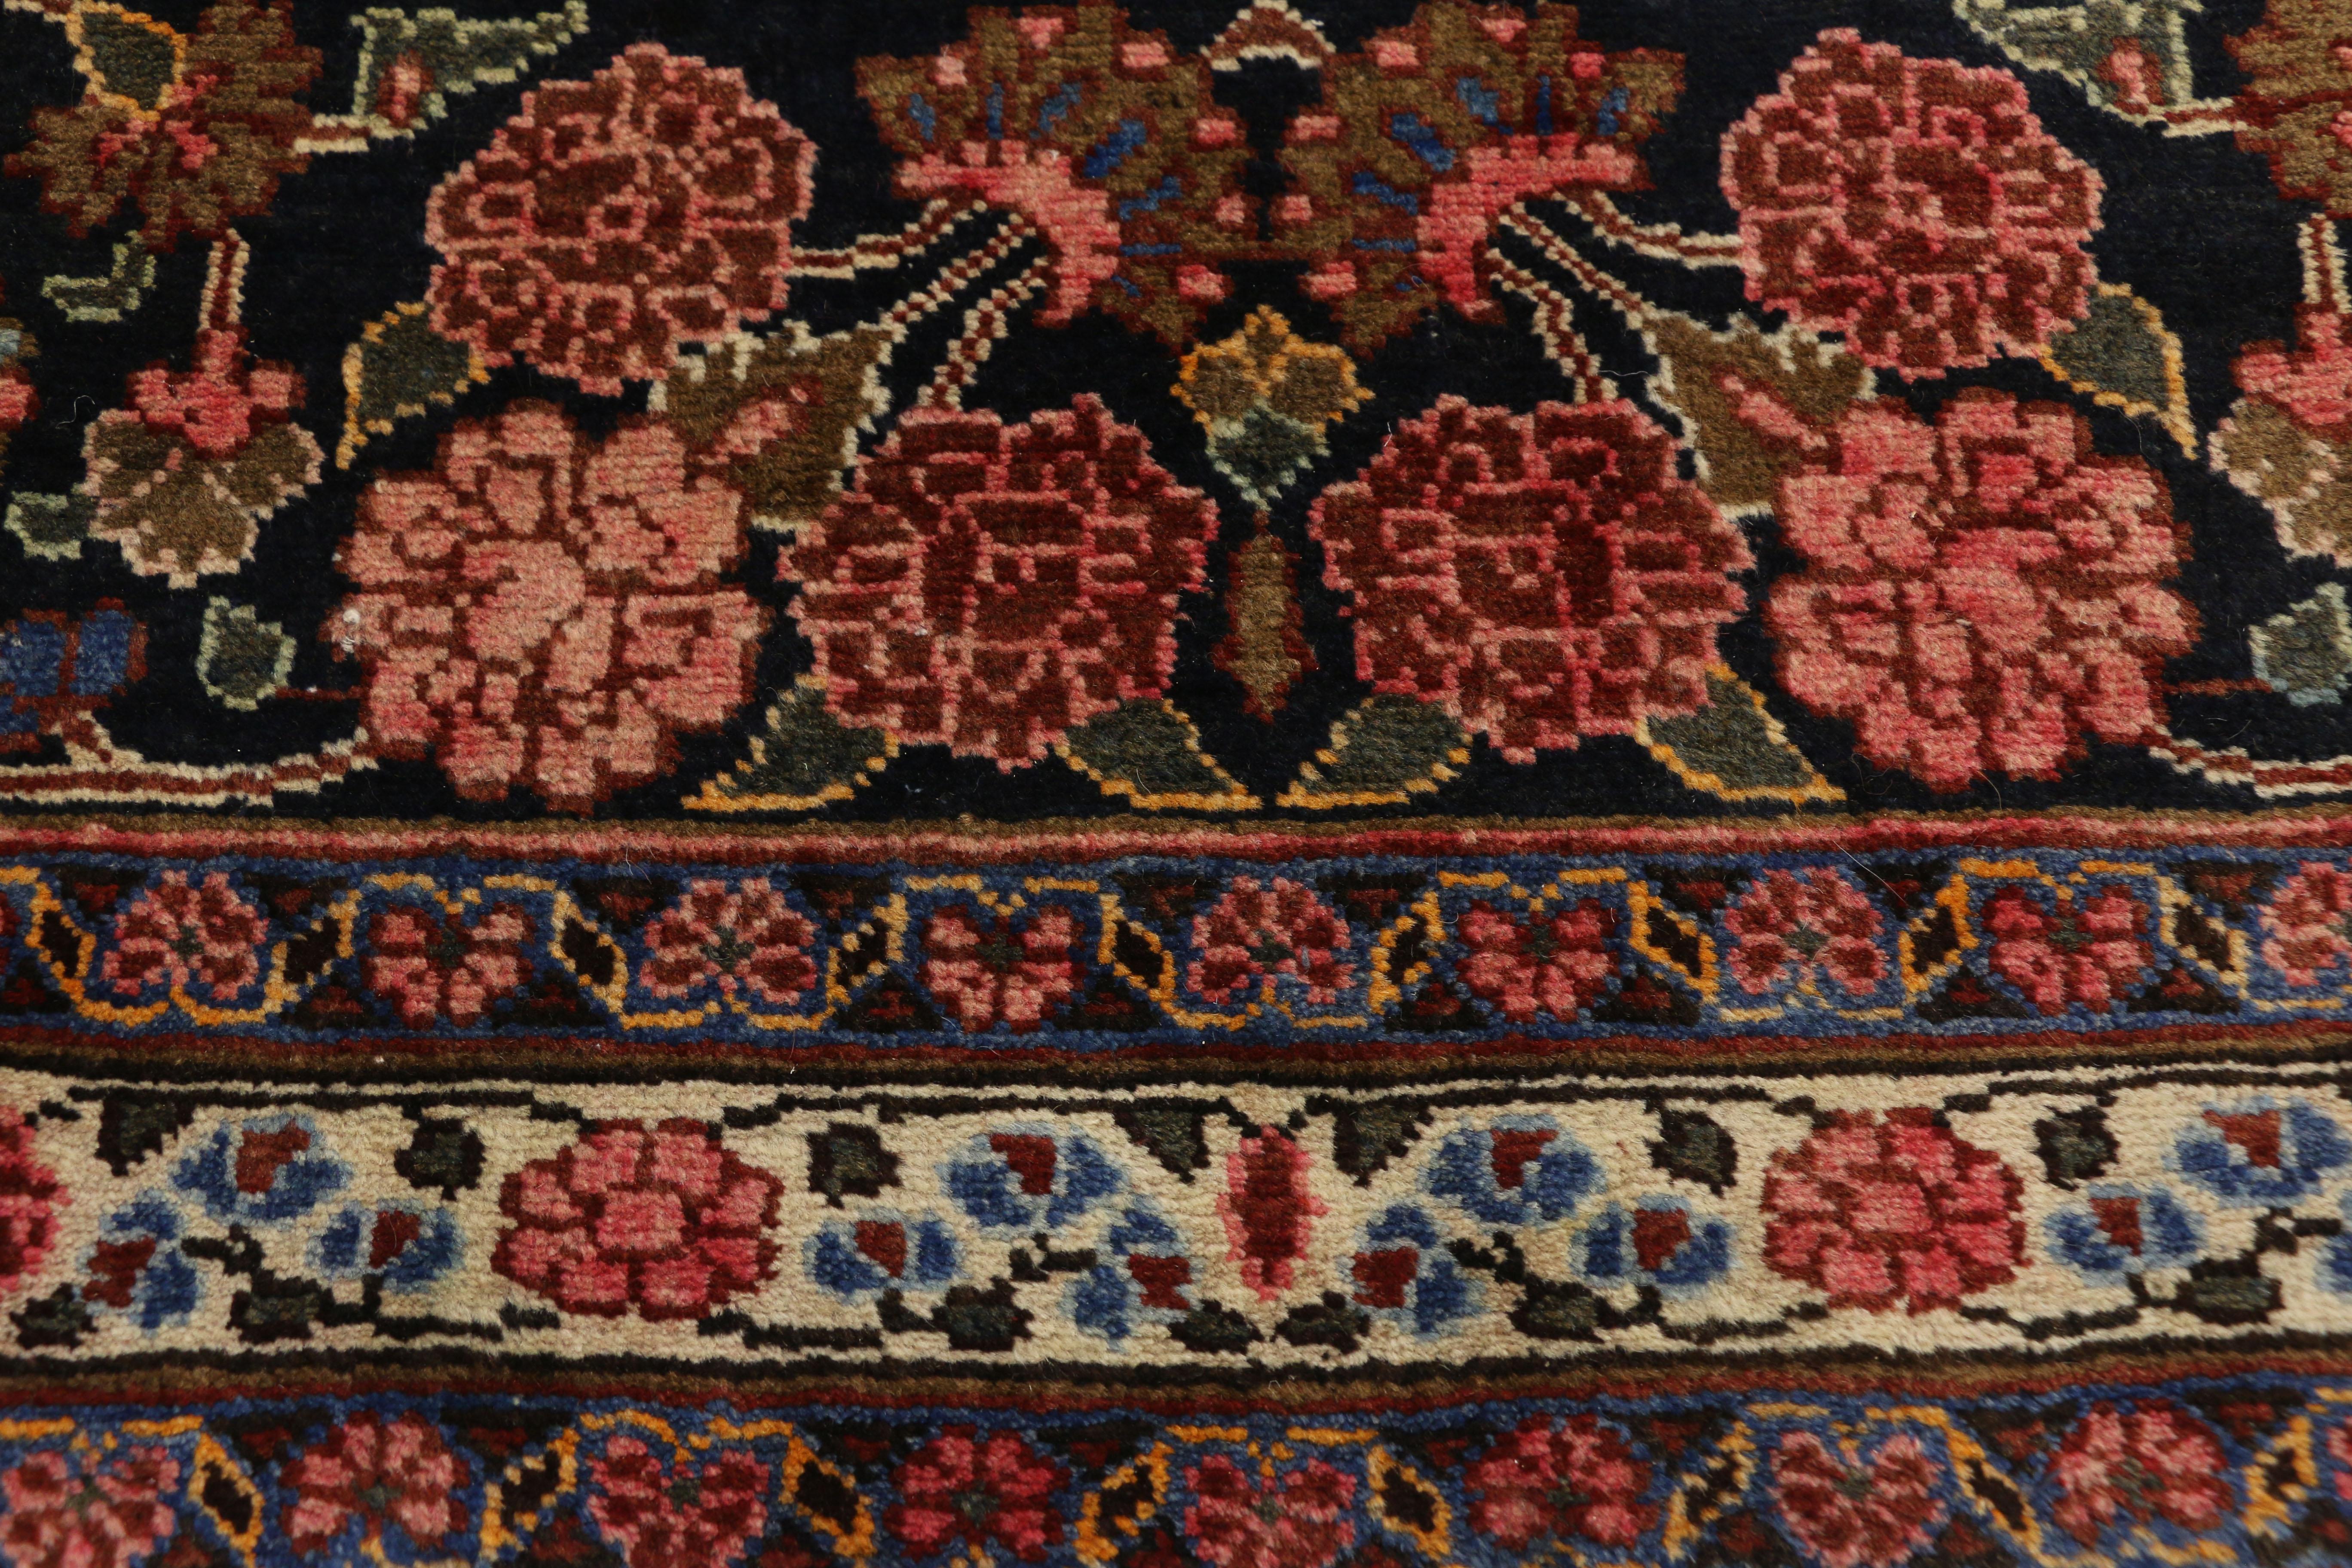 75141, vintage Persian Mashhad Area rug with traditional style. This hand-knotted wool vintage Persian Mashhad rug features a 16-point Mashhad medallion floating among bouquets of blooming palmettes. The central medallion is surrounded by